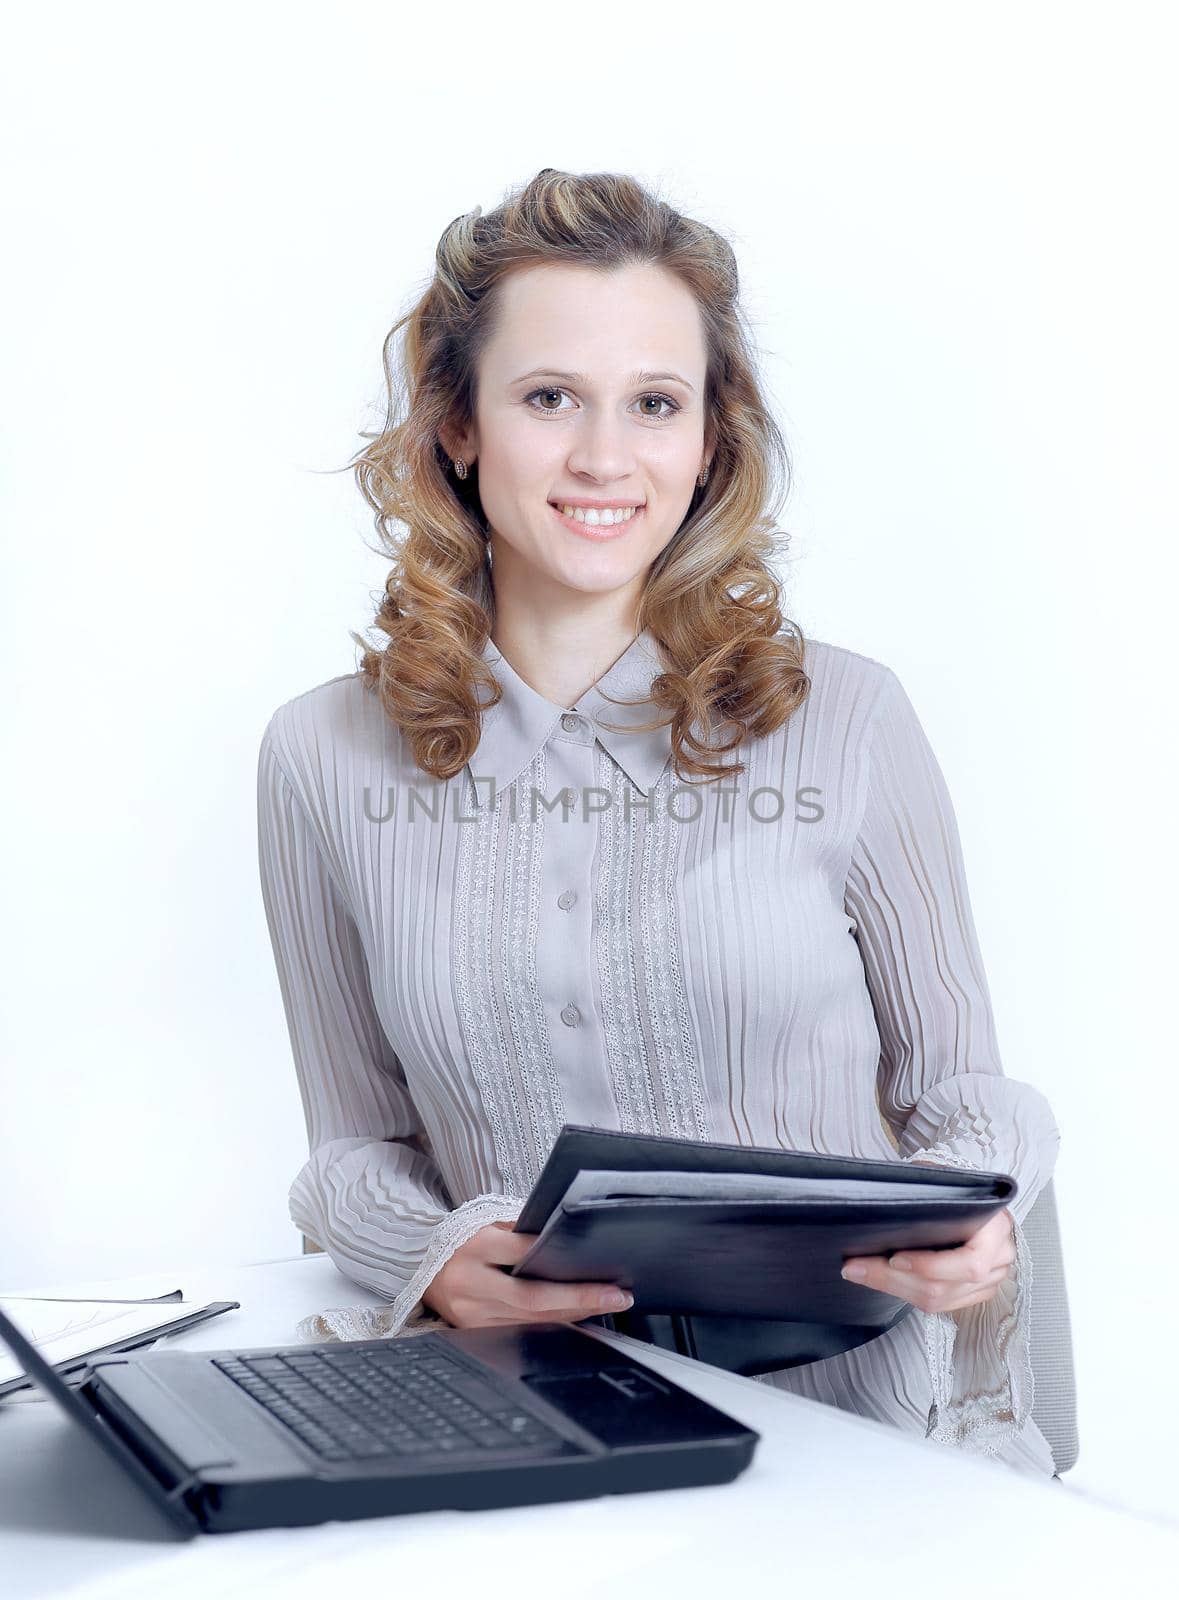 Executive female assistant with documents standing near desktop.photo with copy space.